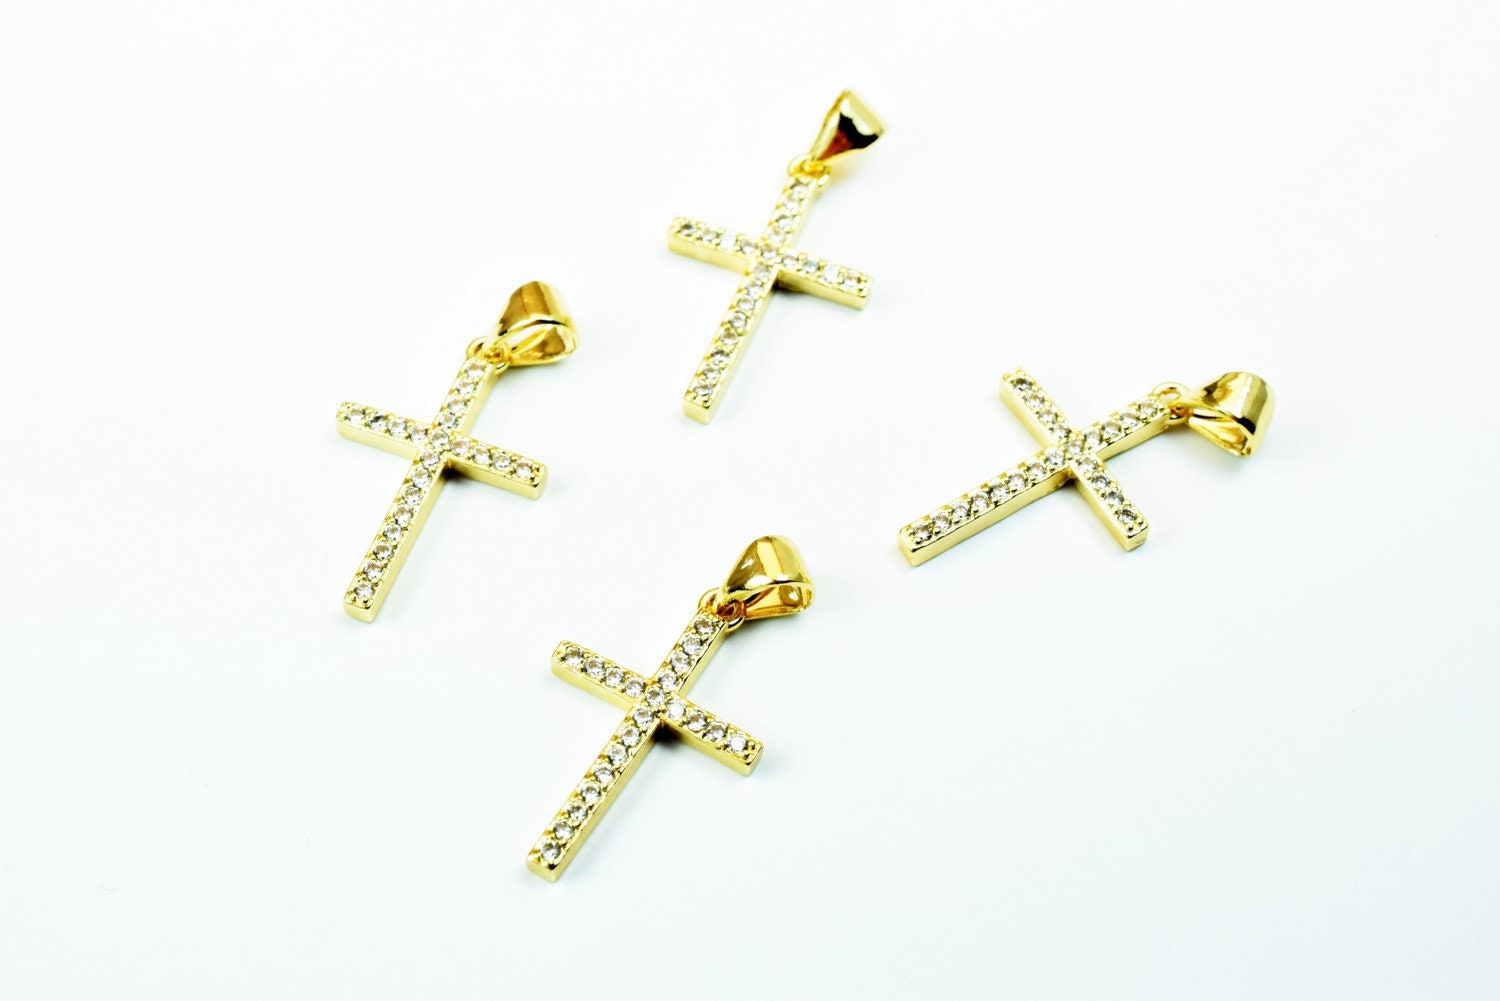 Cross Rhinestone Charm Pendant 14K as Gold Filled* Size 21x13.5mm Micro Pave Beads Charm with Clear CZ Cubic Zirconia GFM26A